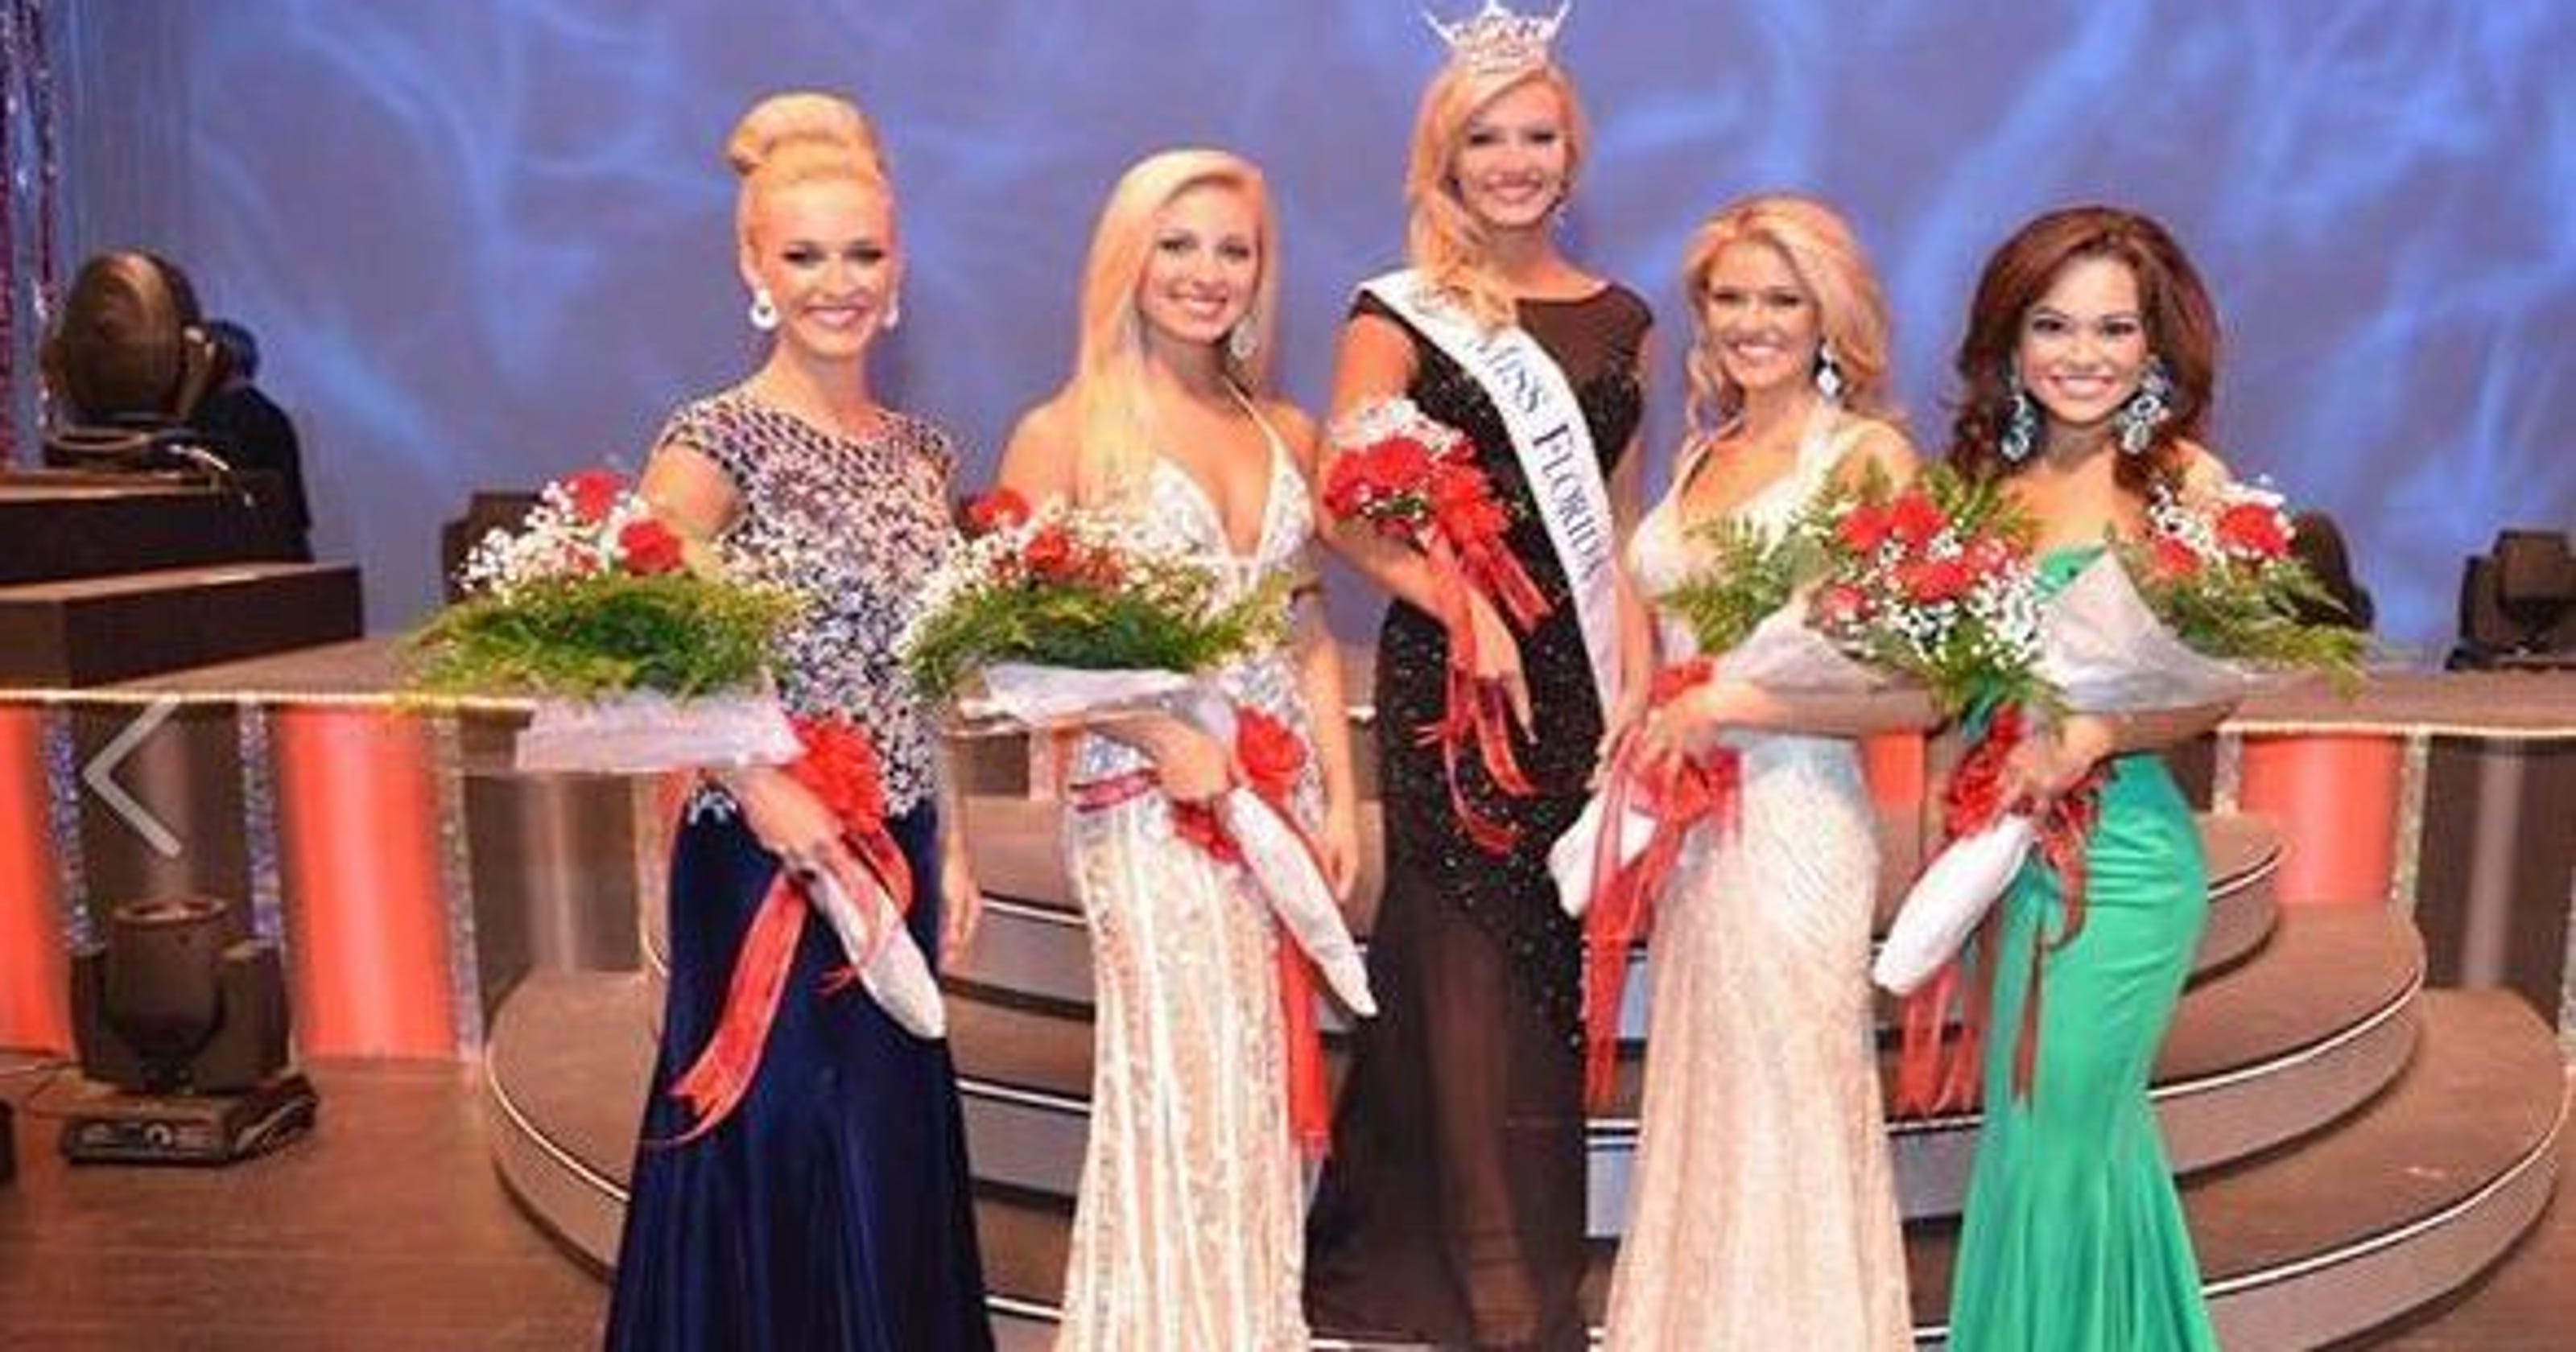 Whoops Miss Florida Pageant Crowns Wrong Winner